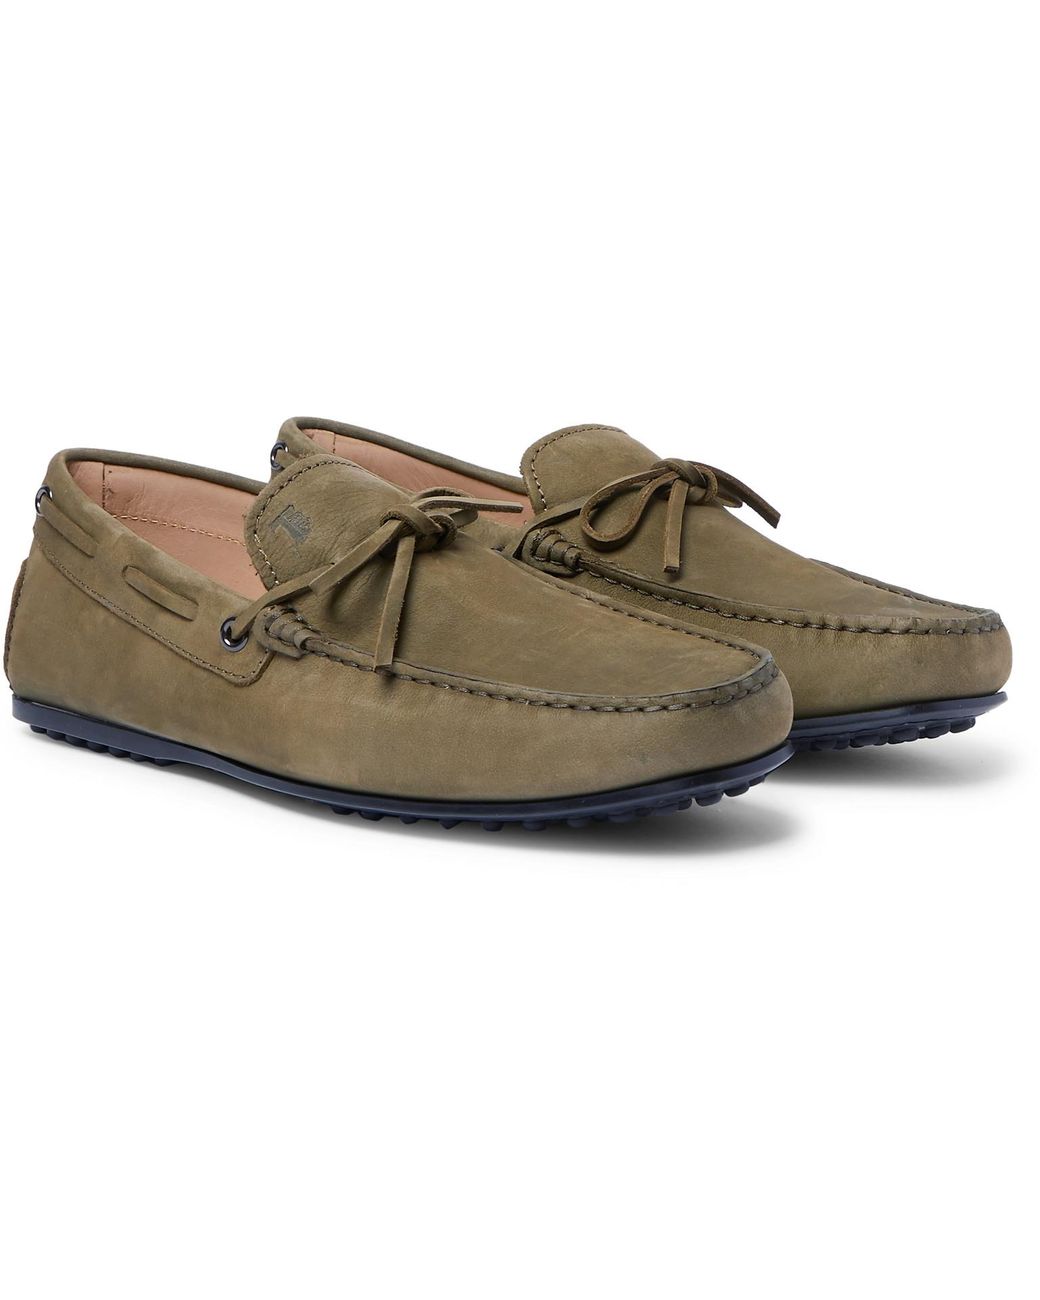 Tod's Rubber City Gommino Nubuck Driving Shoes in Green for Men - Lyst